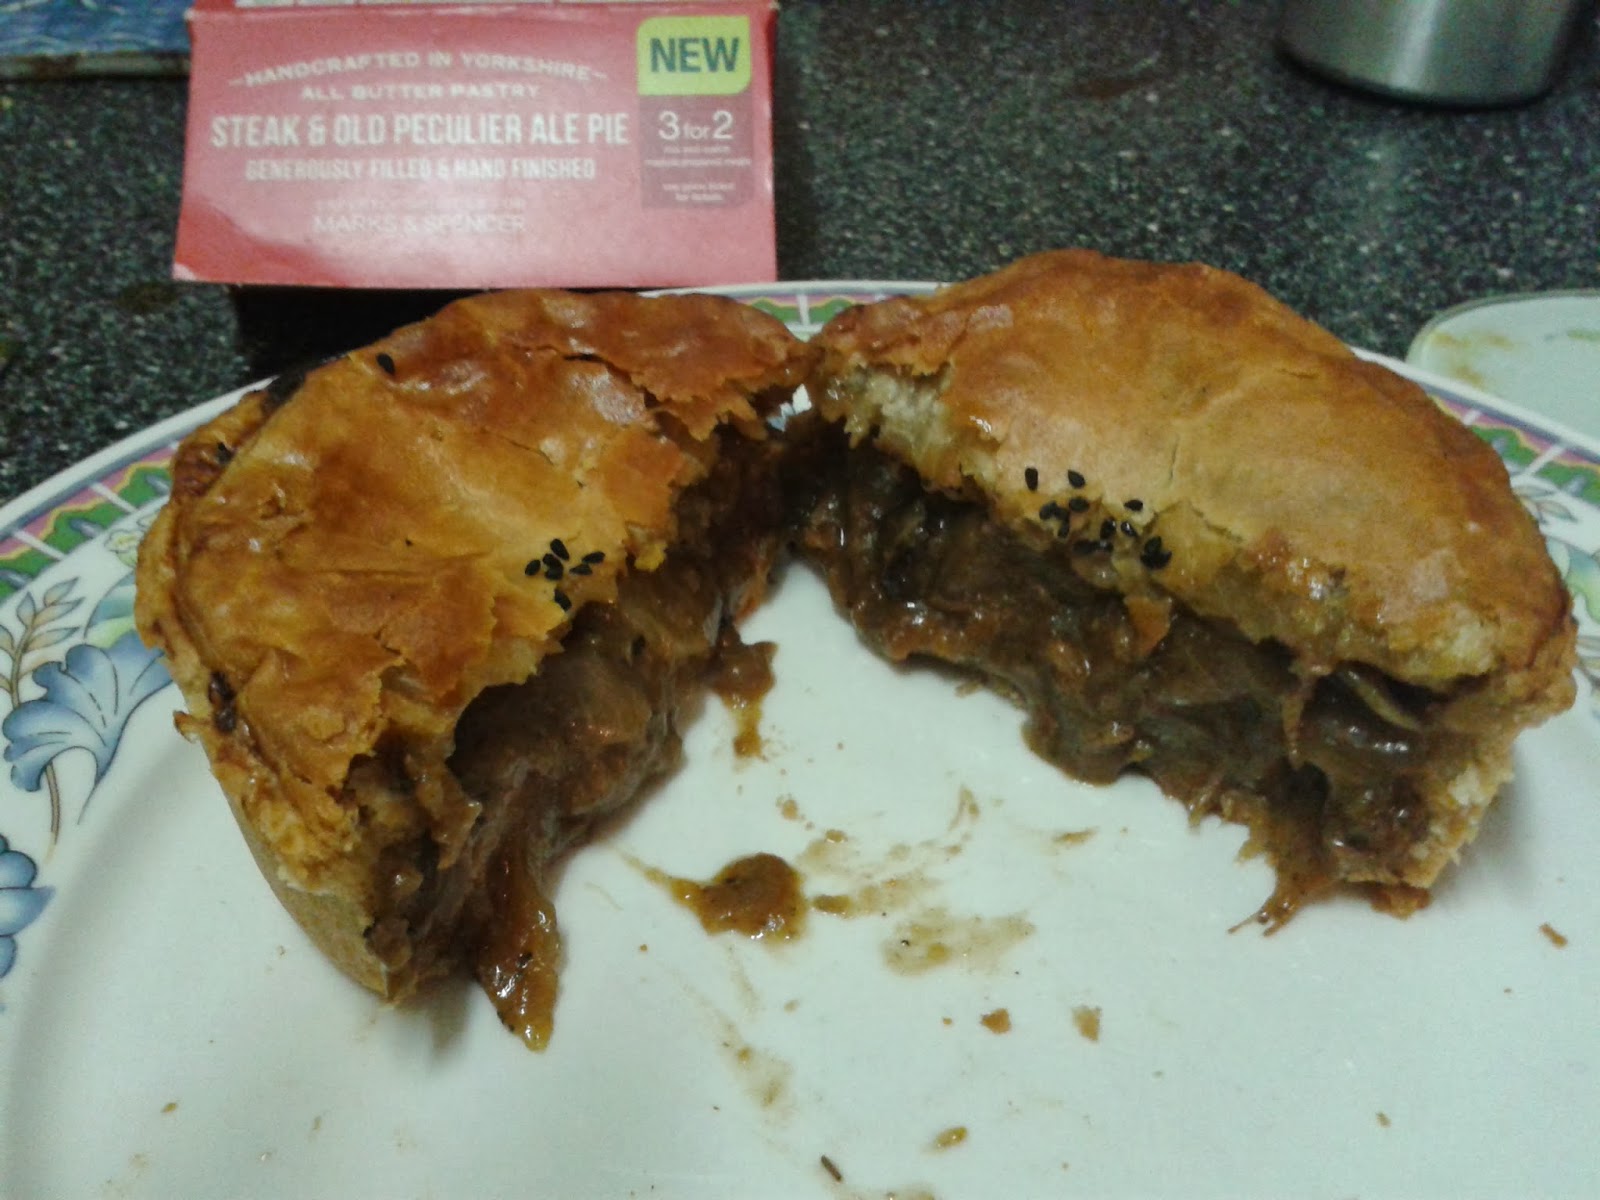 Pierate - Pie Reviews: Have Marks and Spencer got the Pie ...